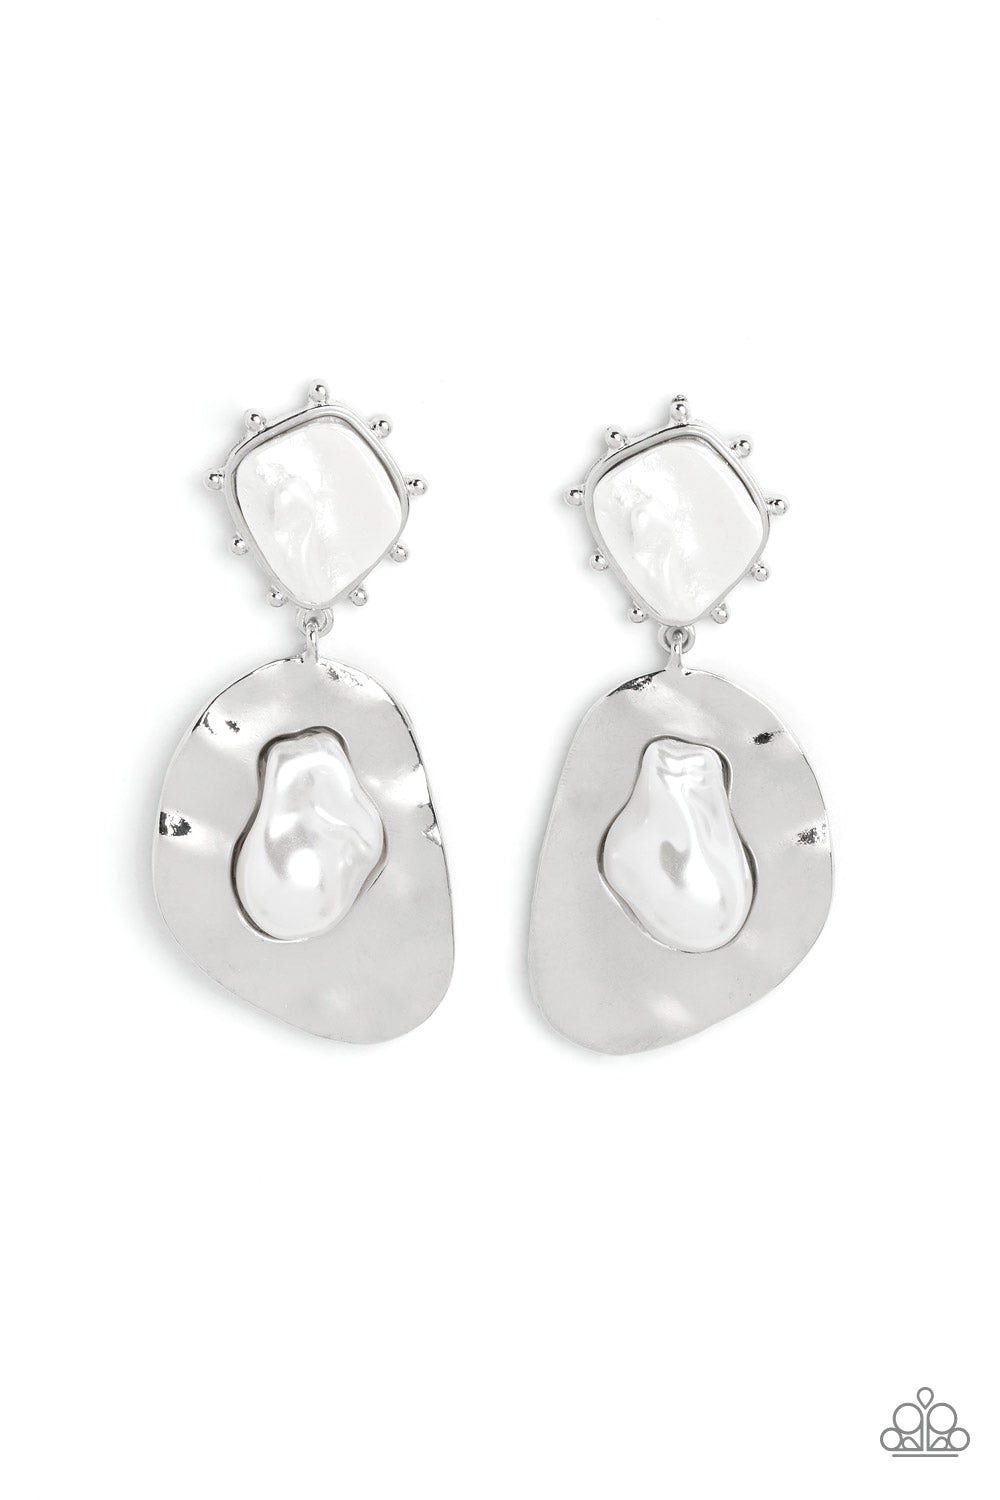 An oversized hammered, asymmetrical silver disc dangles from a more dainty, asymmetrical silver frame, accented with raised silver studs around its edges.